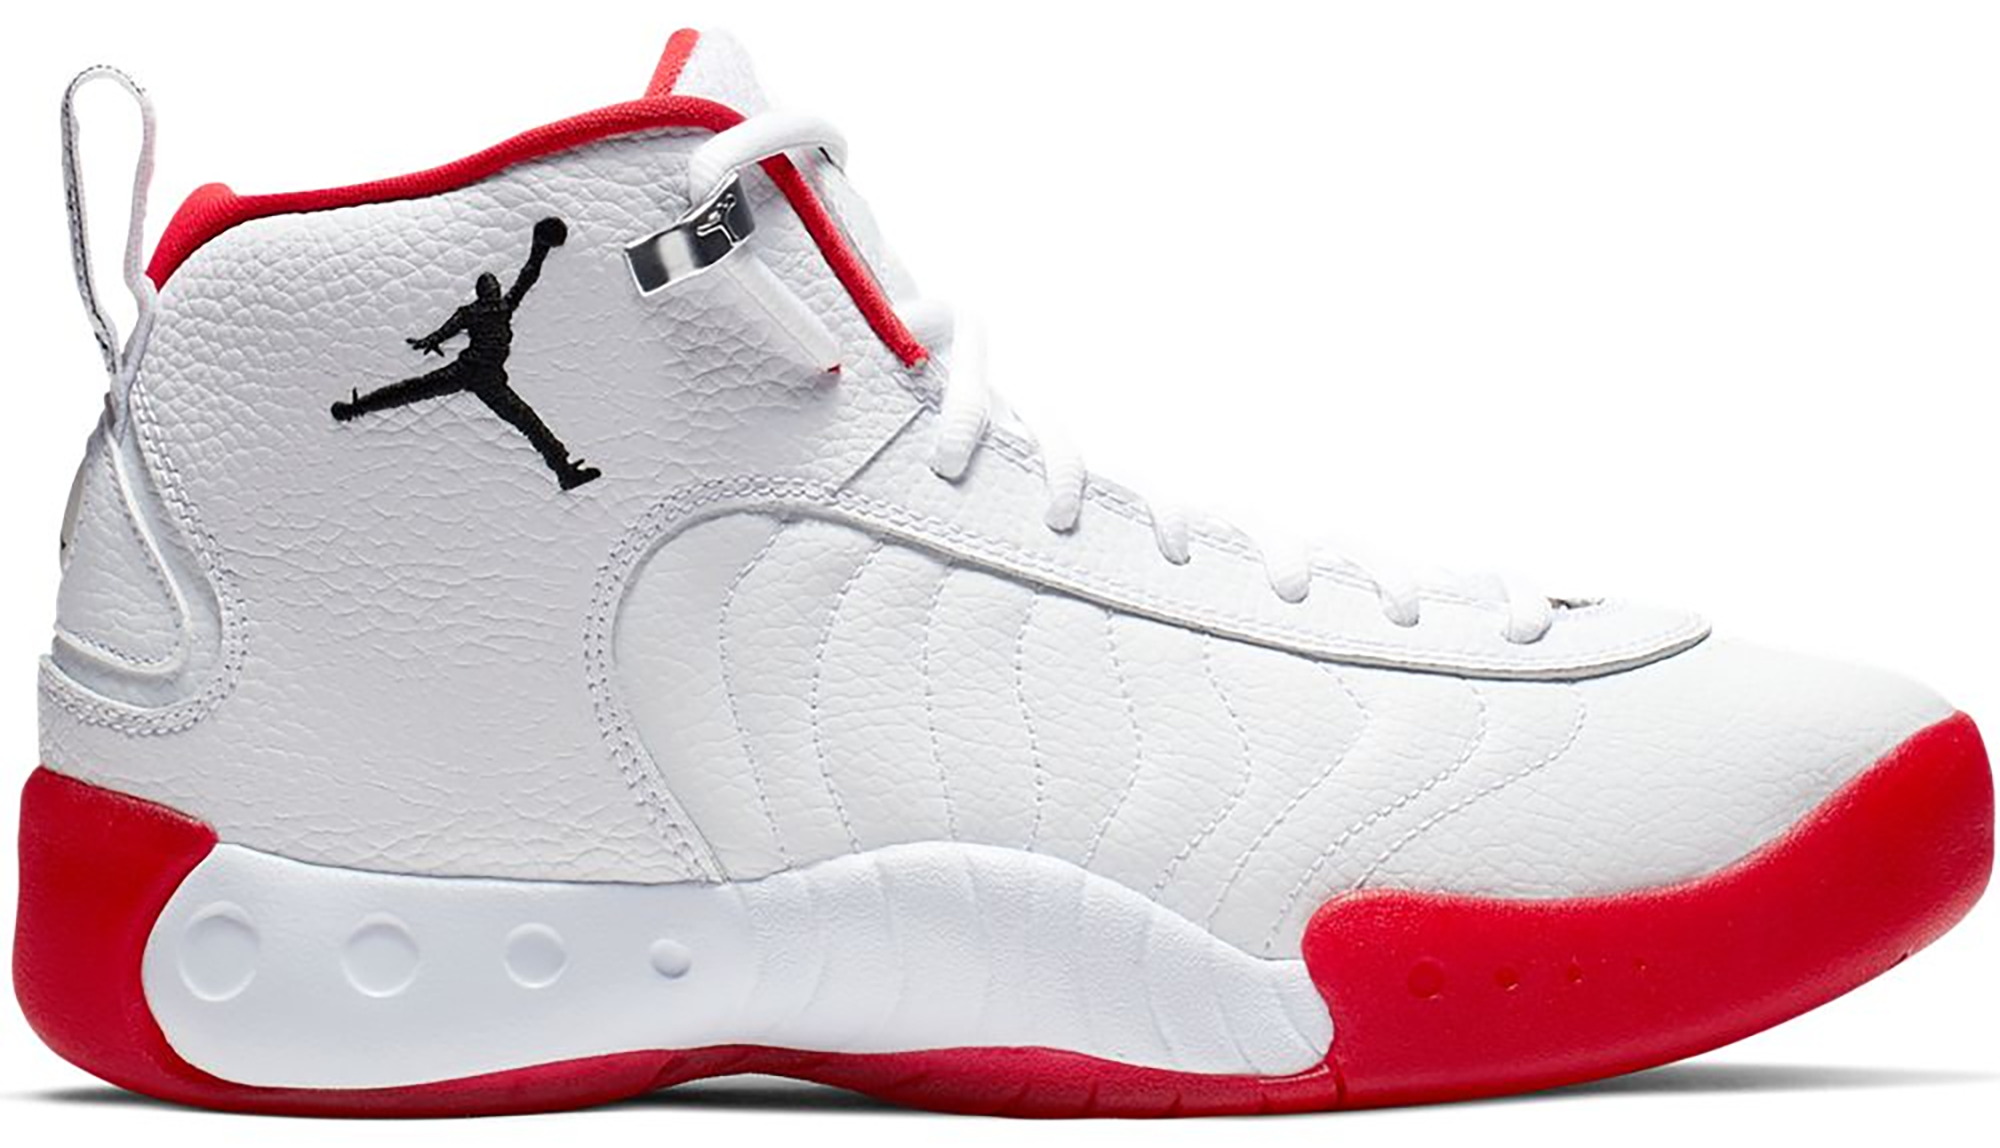 jordan jumpman pro quick white and red